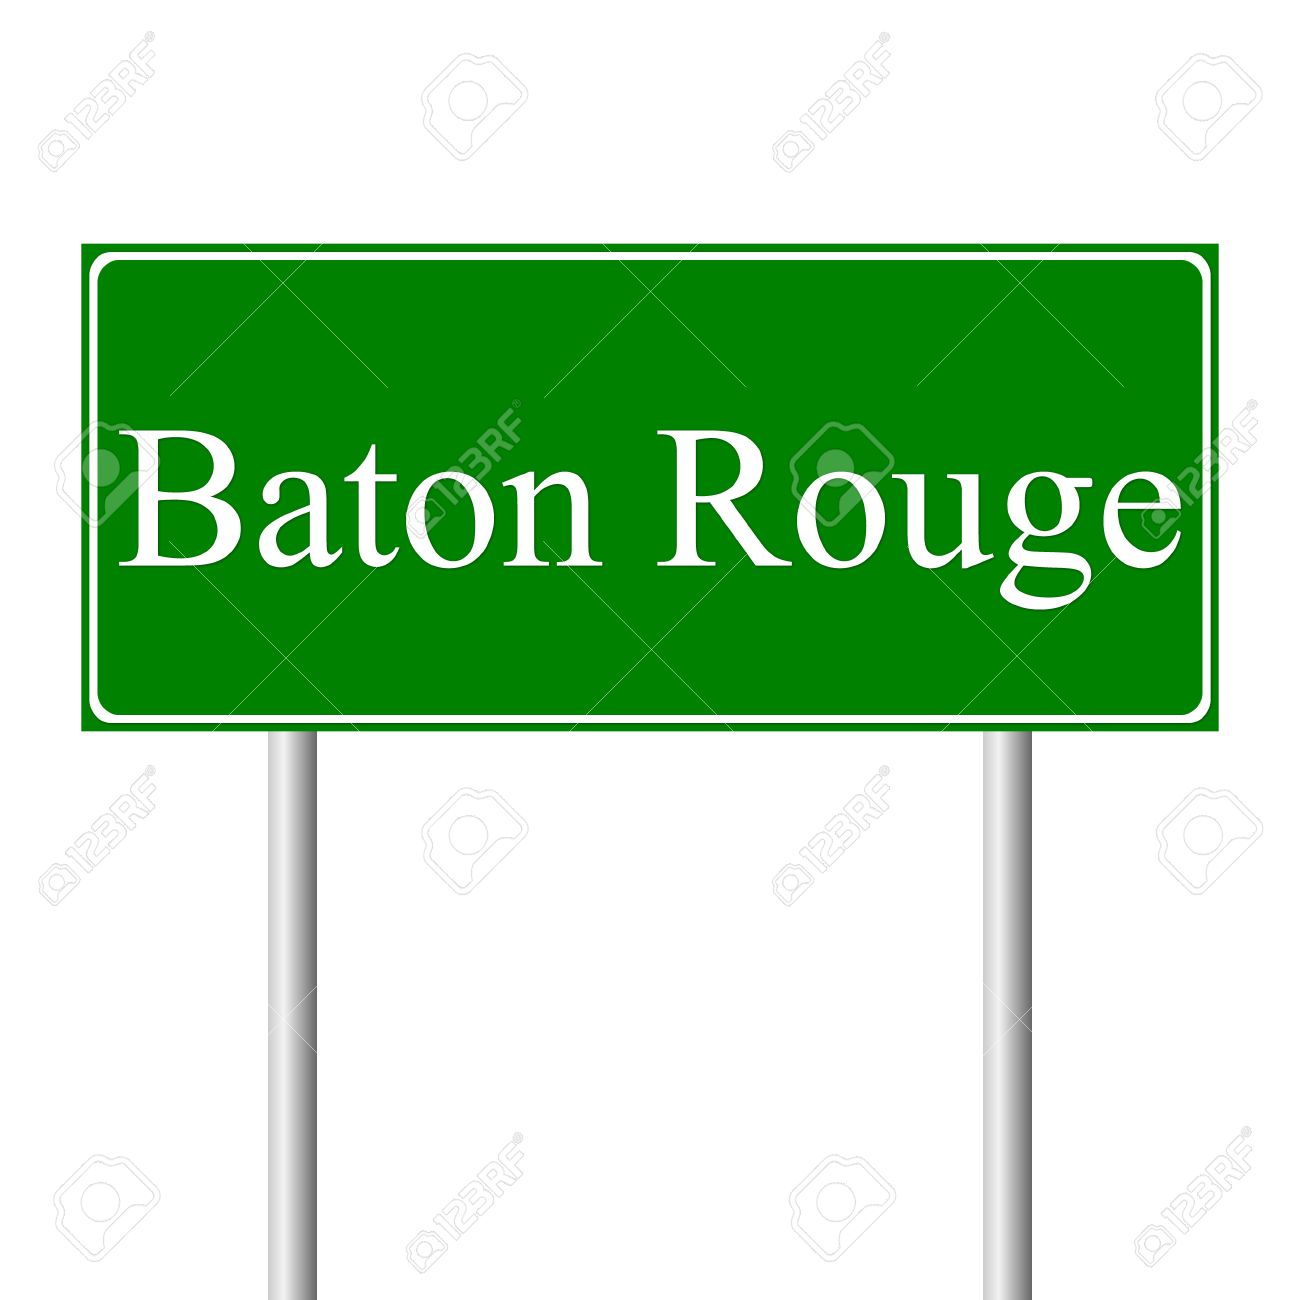 Baton Rouge Green Road Sign Isolated On White Background Royalty.